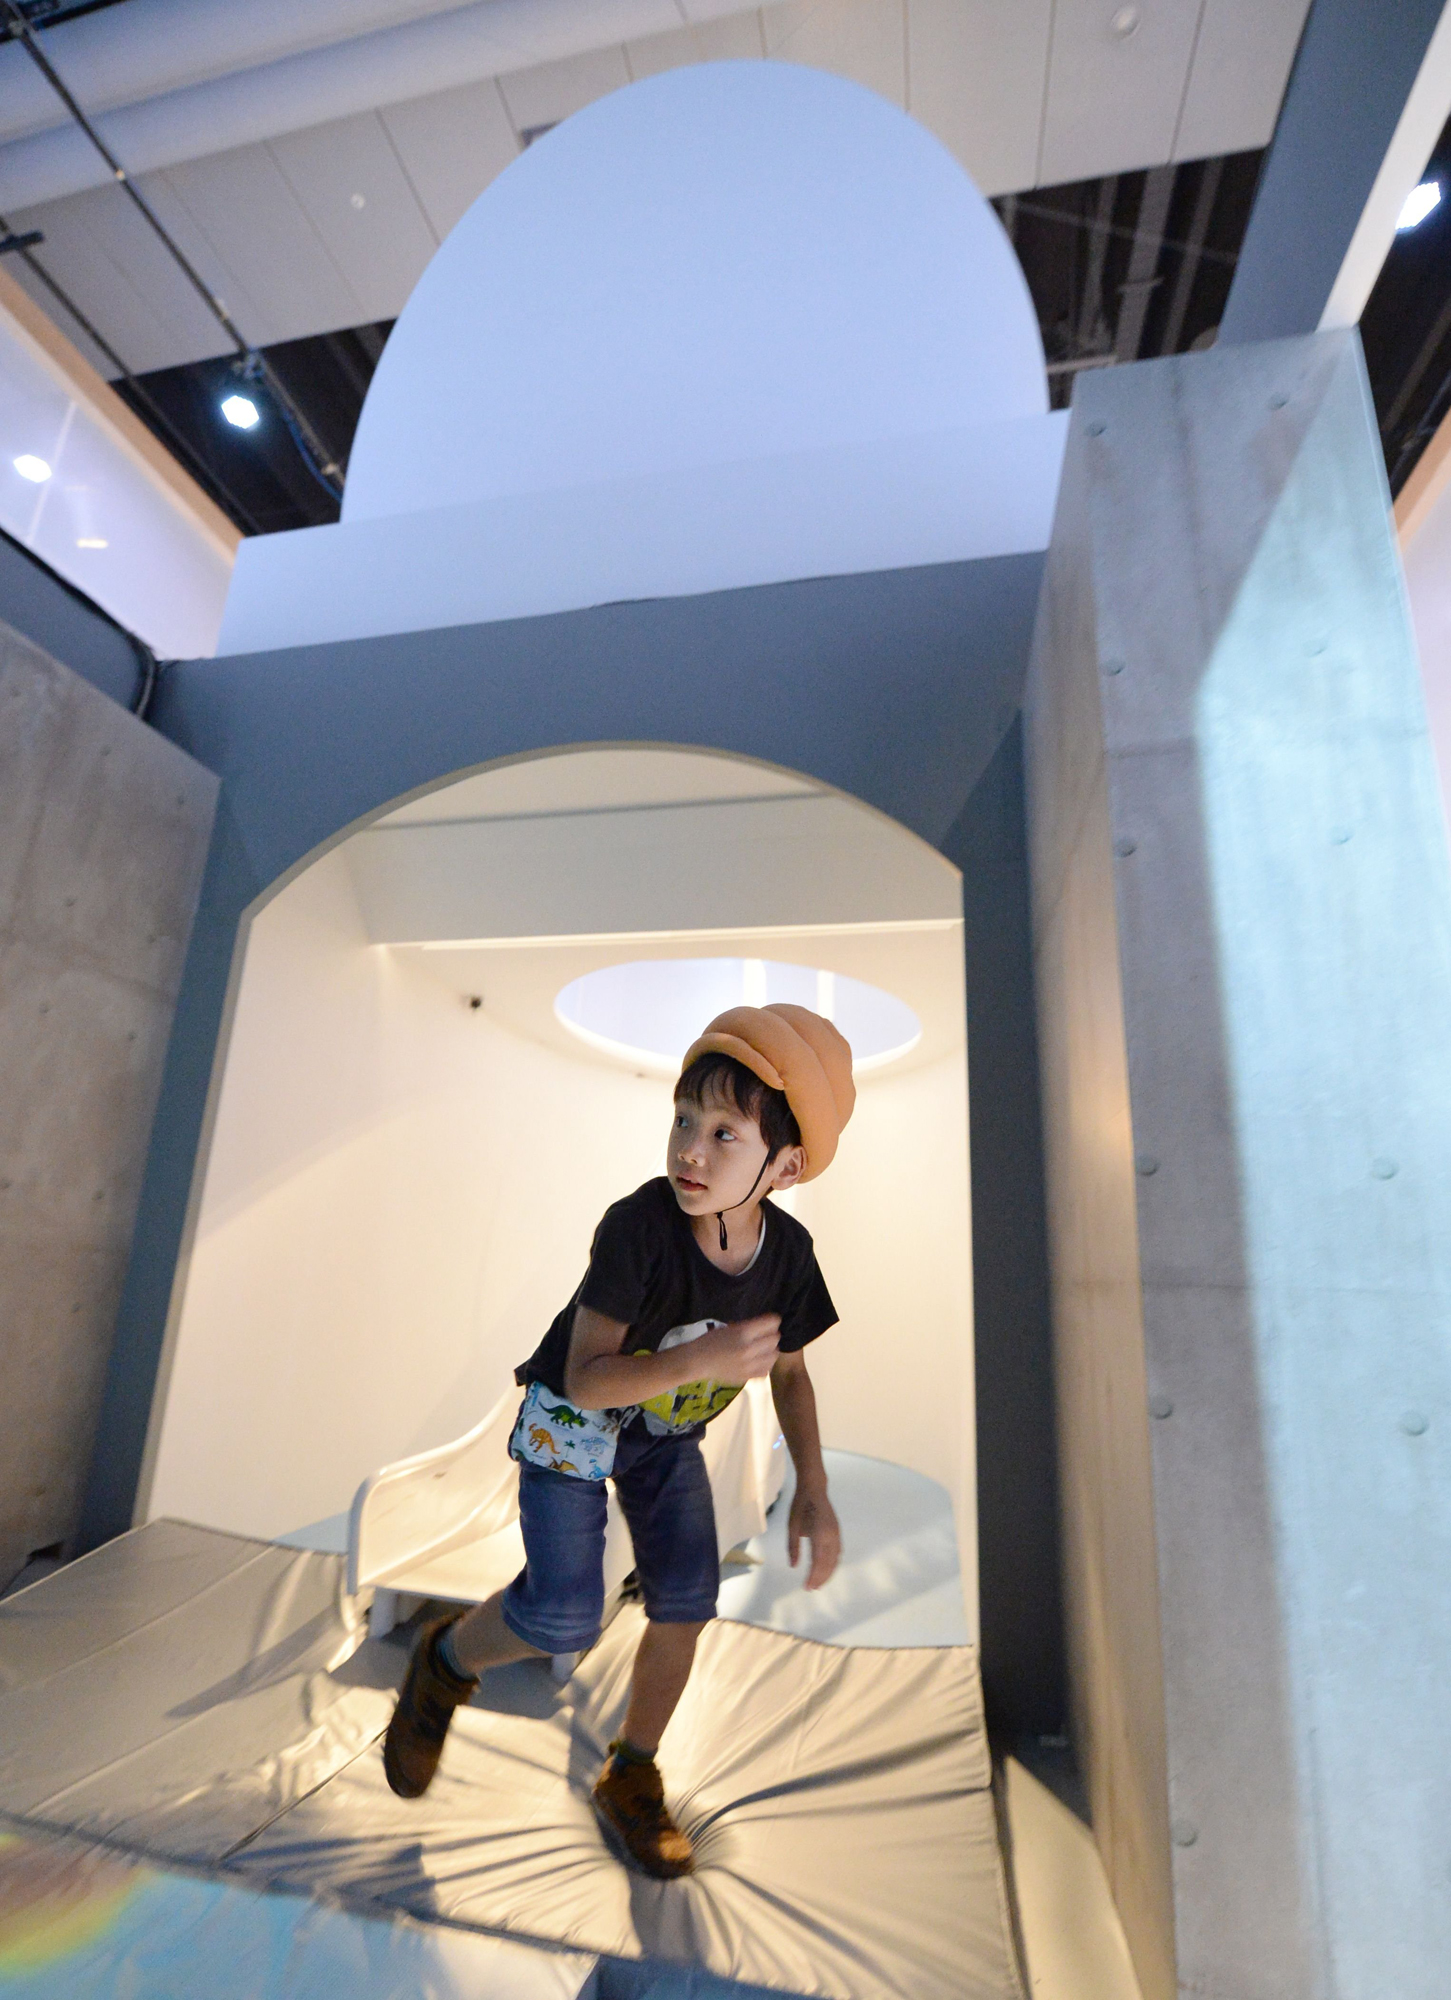 A child wearing a poo-shaped hat gets up from a giant toilet slide at a toilet exhibition at the National Museum of Emerging Science and Innovation in Tokyo on July 9, 2014.